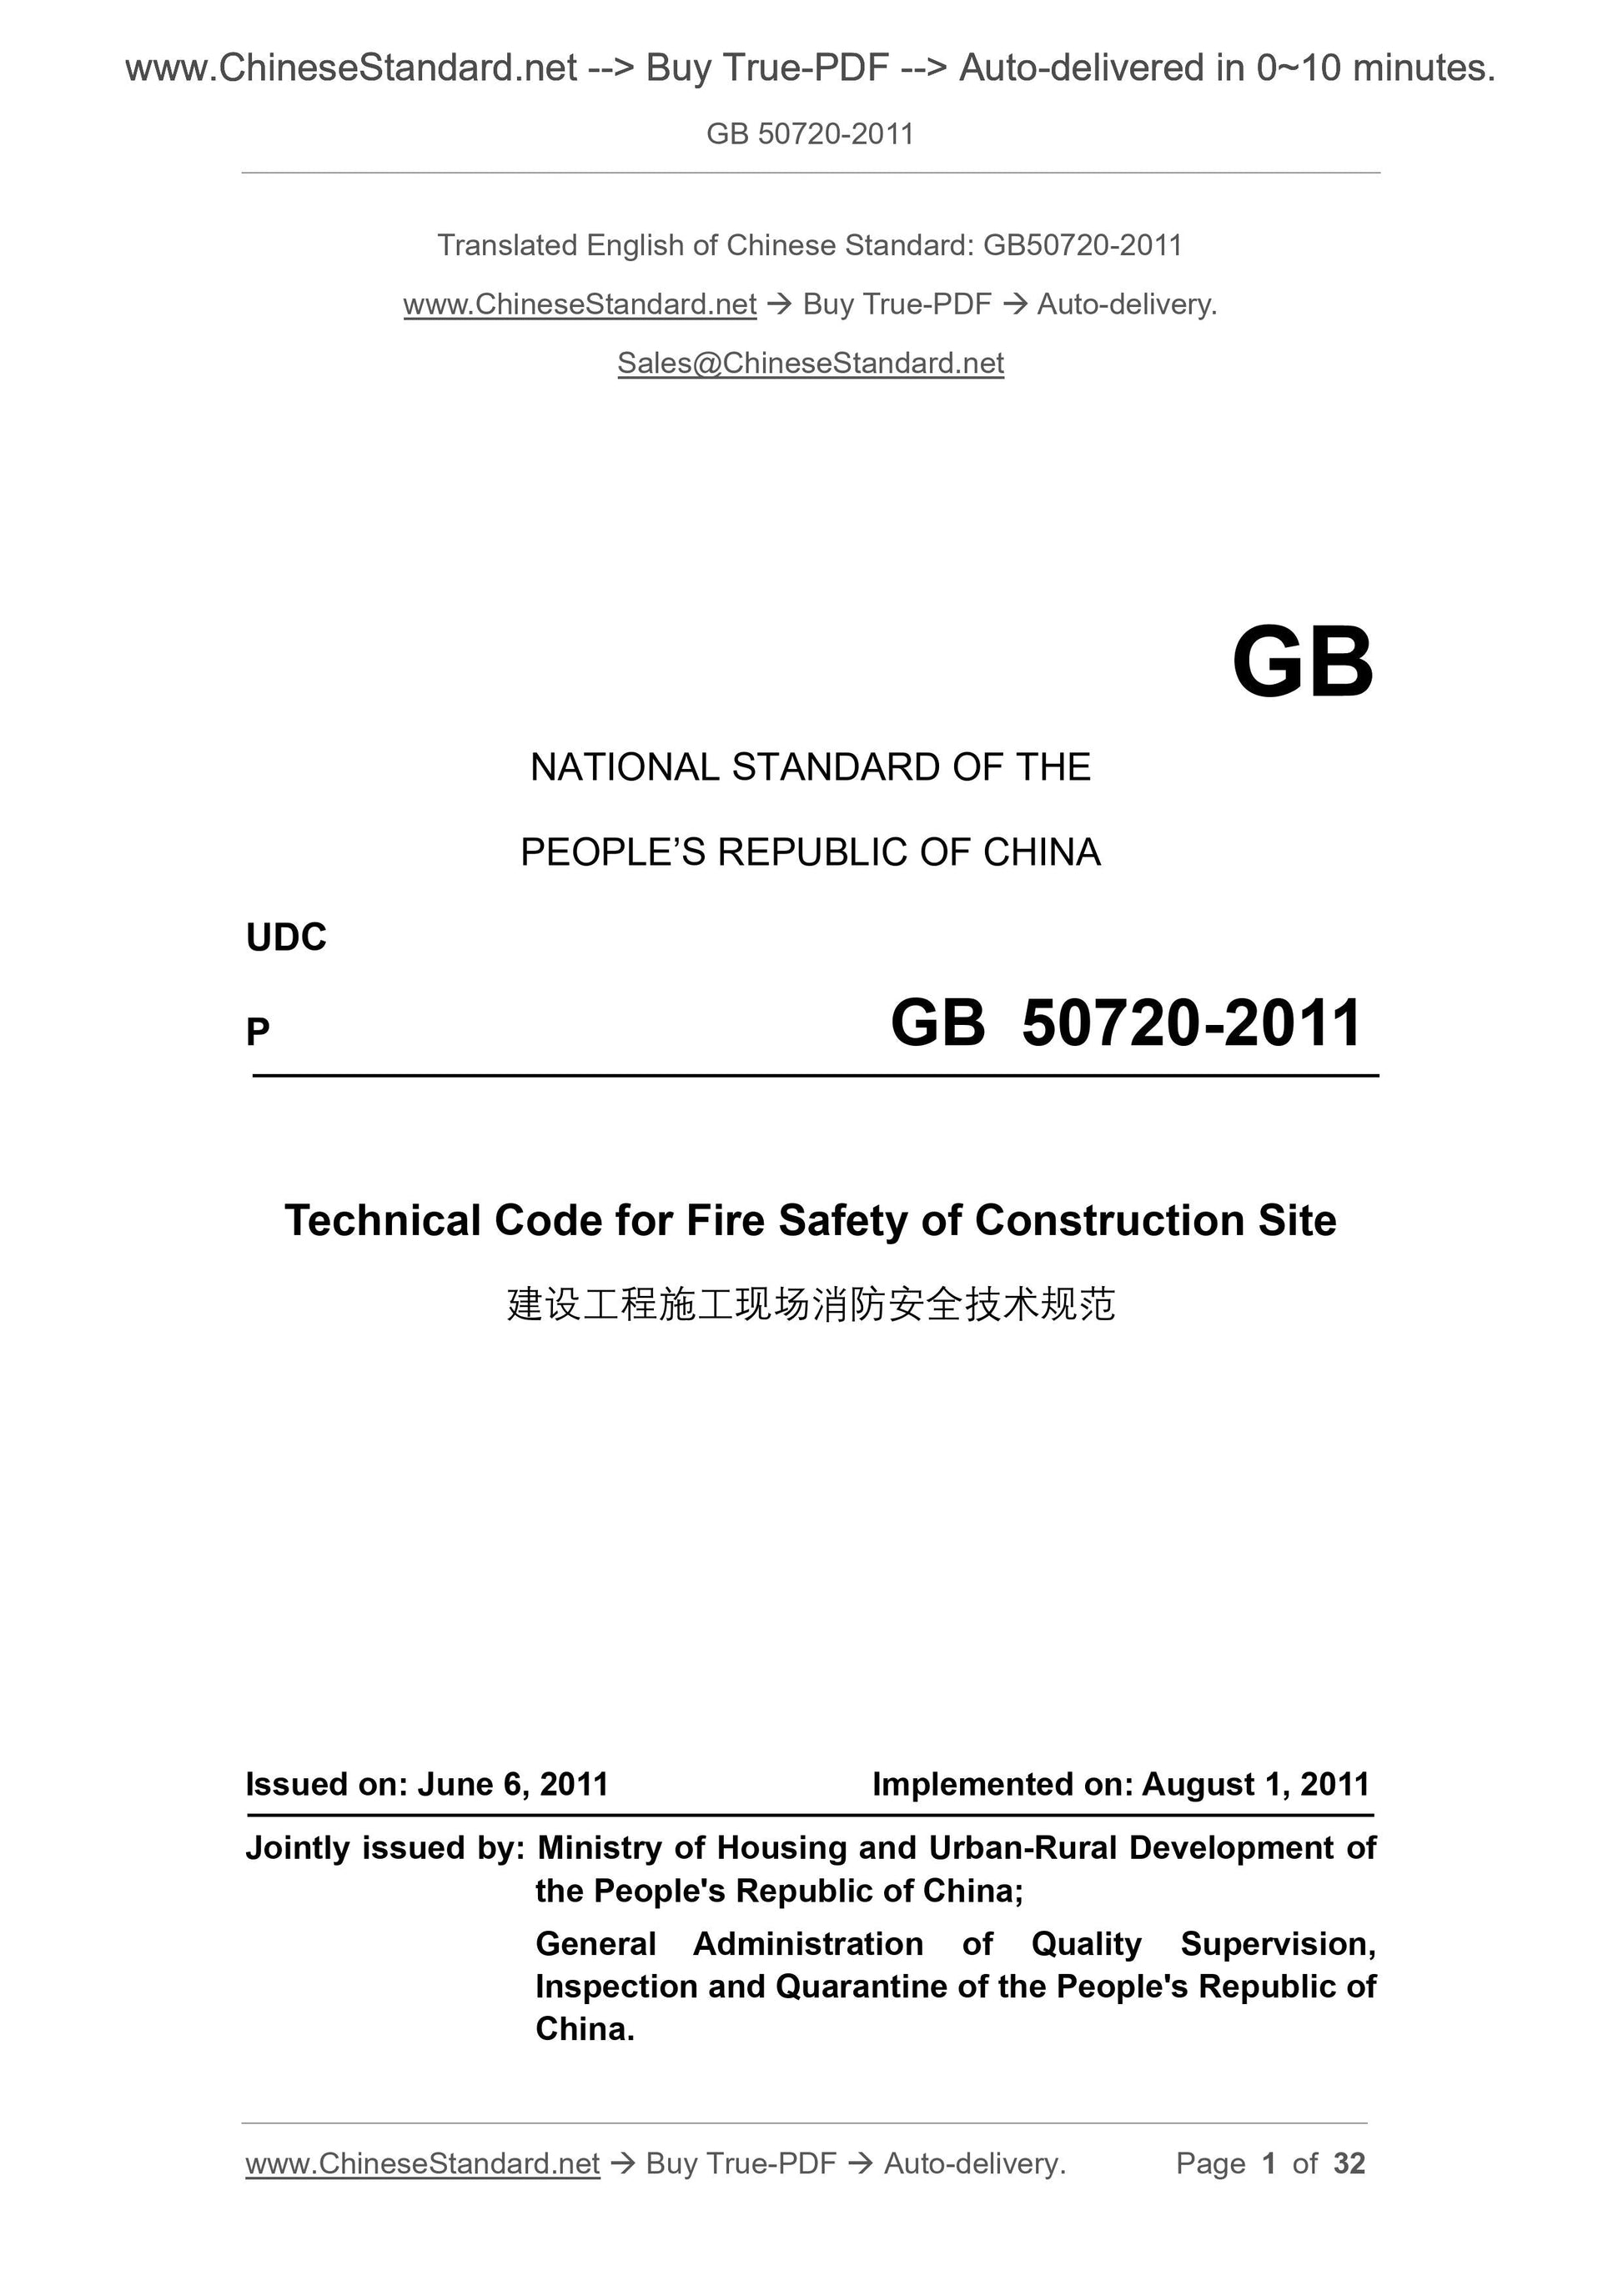 GB 50720-2011 Page 1